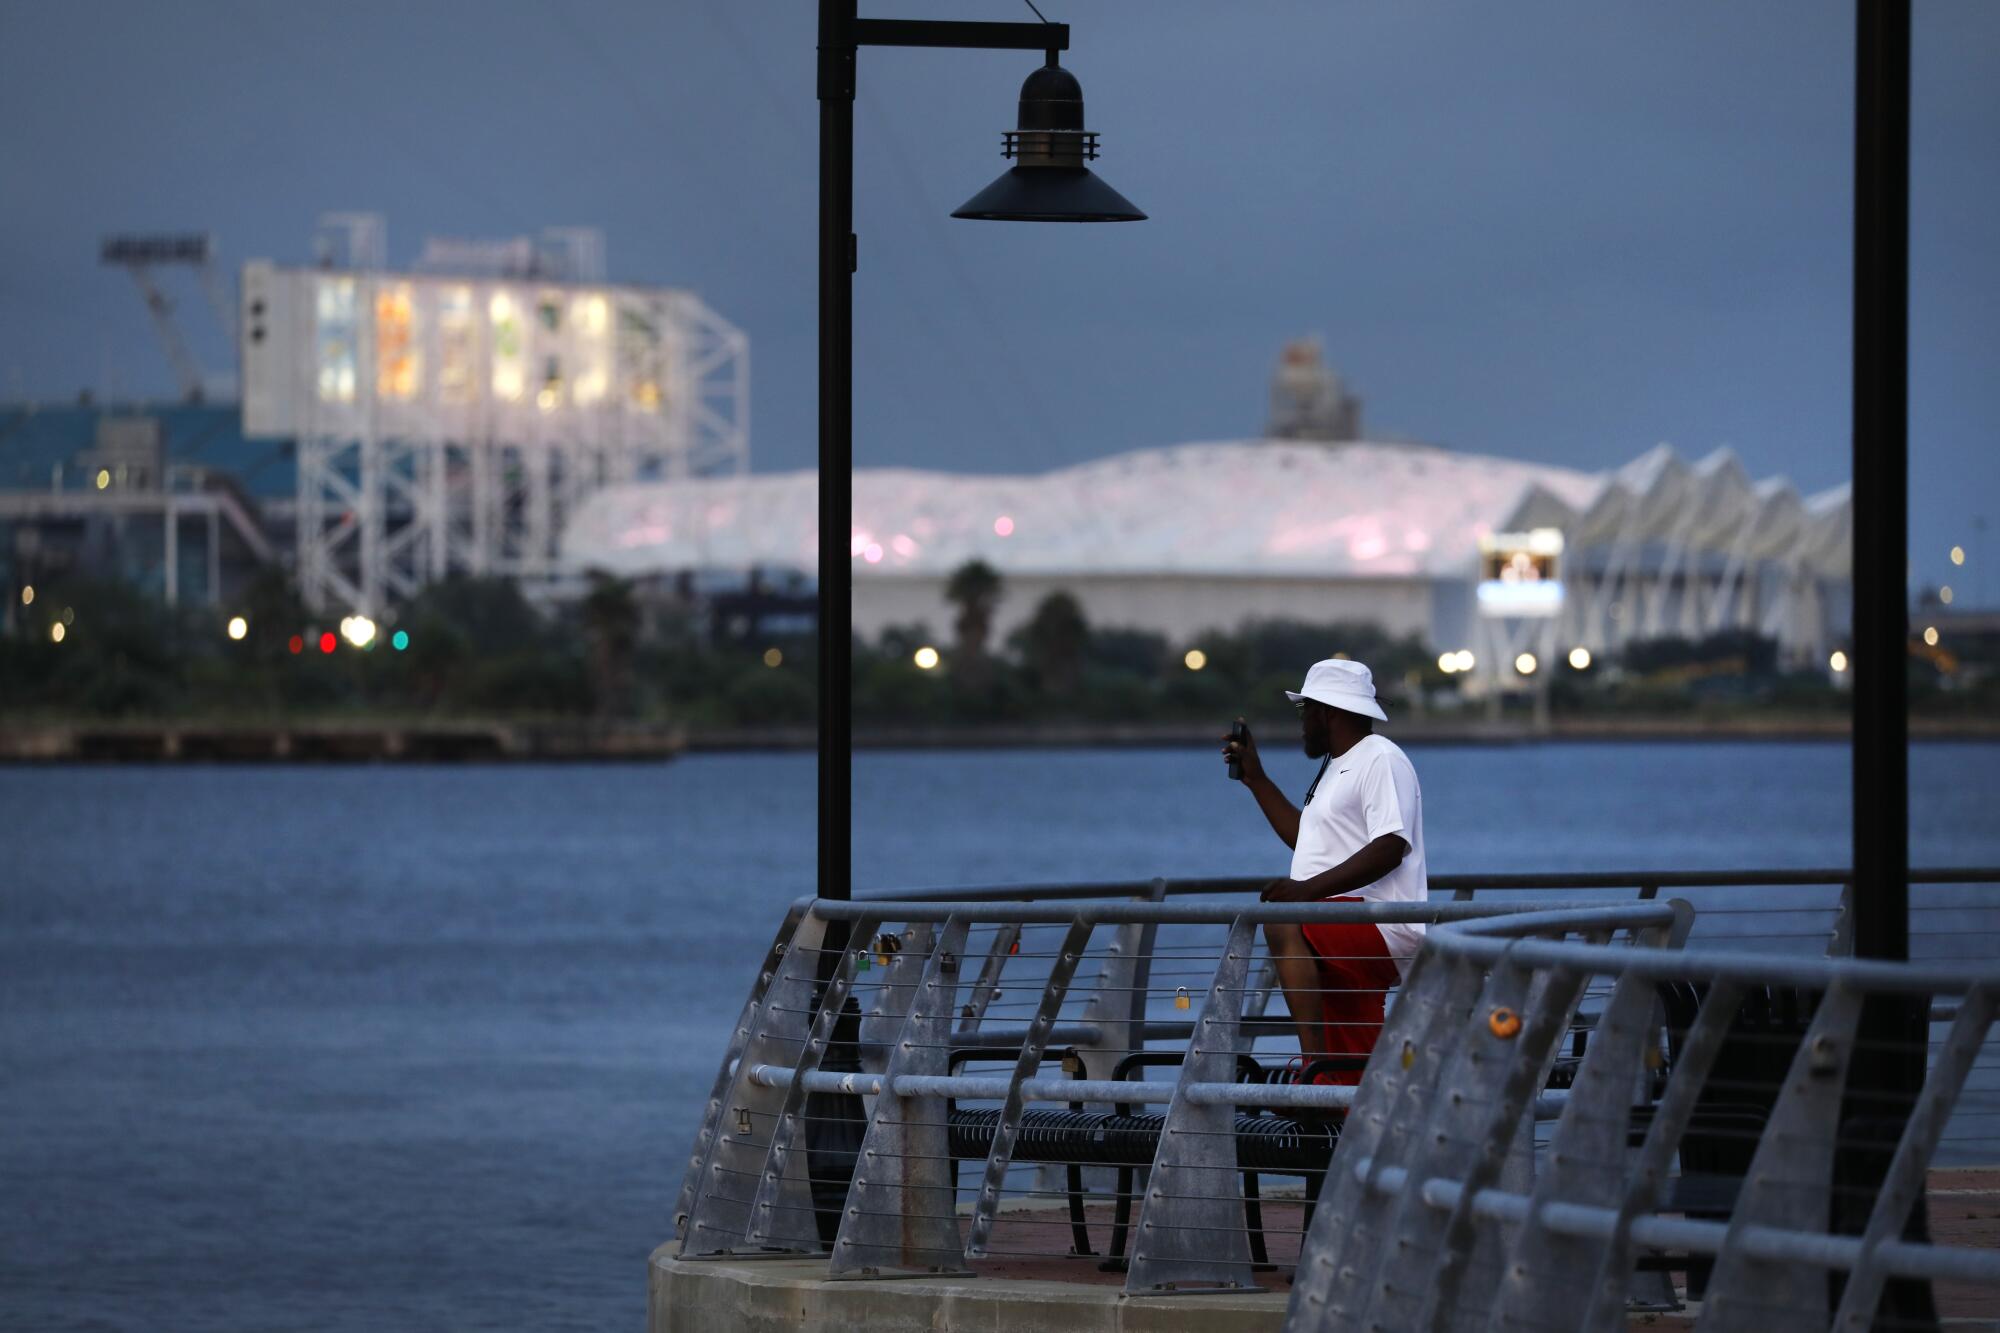 A man in a white shirt and hat and red pants takes pictures along a river, across from a white stadium that is lighted up